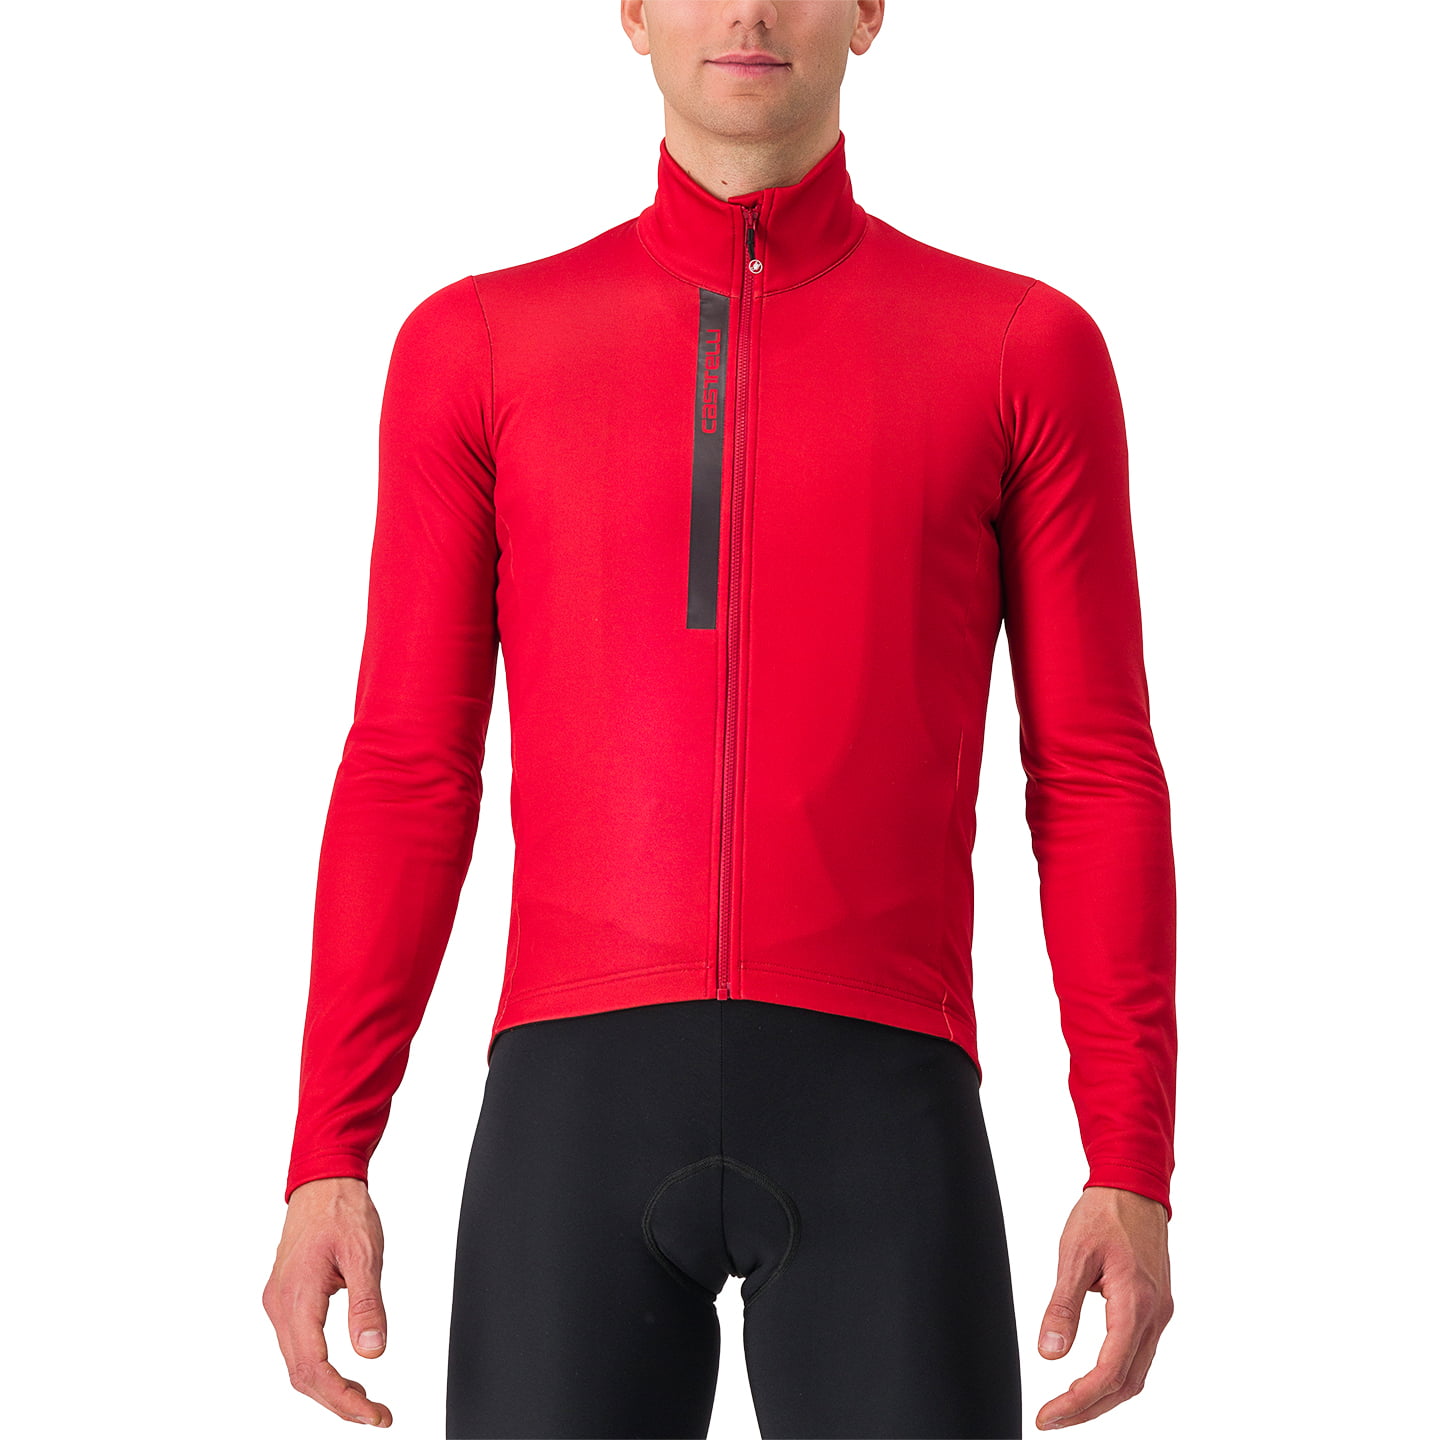 CASTELLI Entrata Thermal long-sleeved jersey Long Sleeve Jersey, for men, size XL, Cycling jersey, Cycle clothing